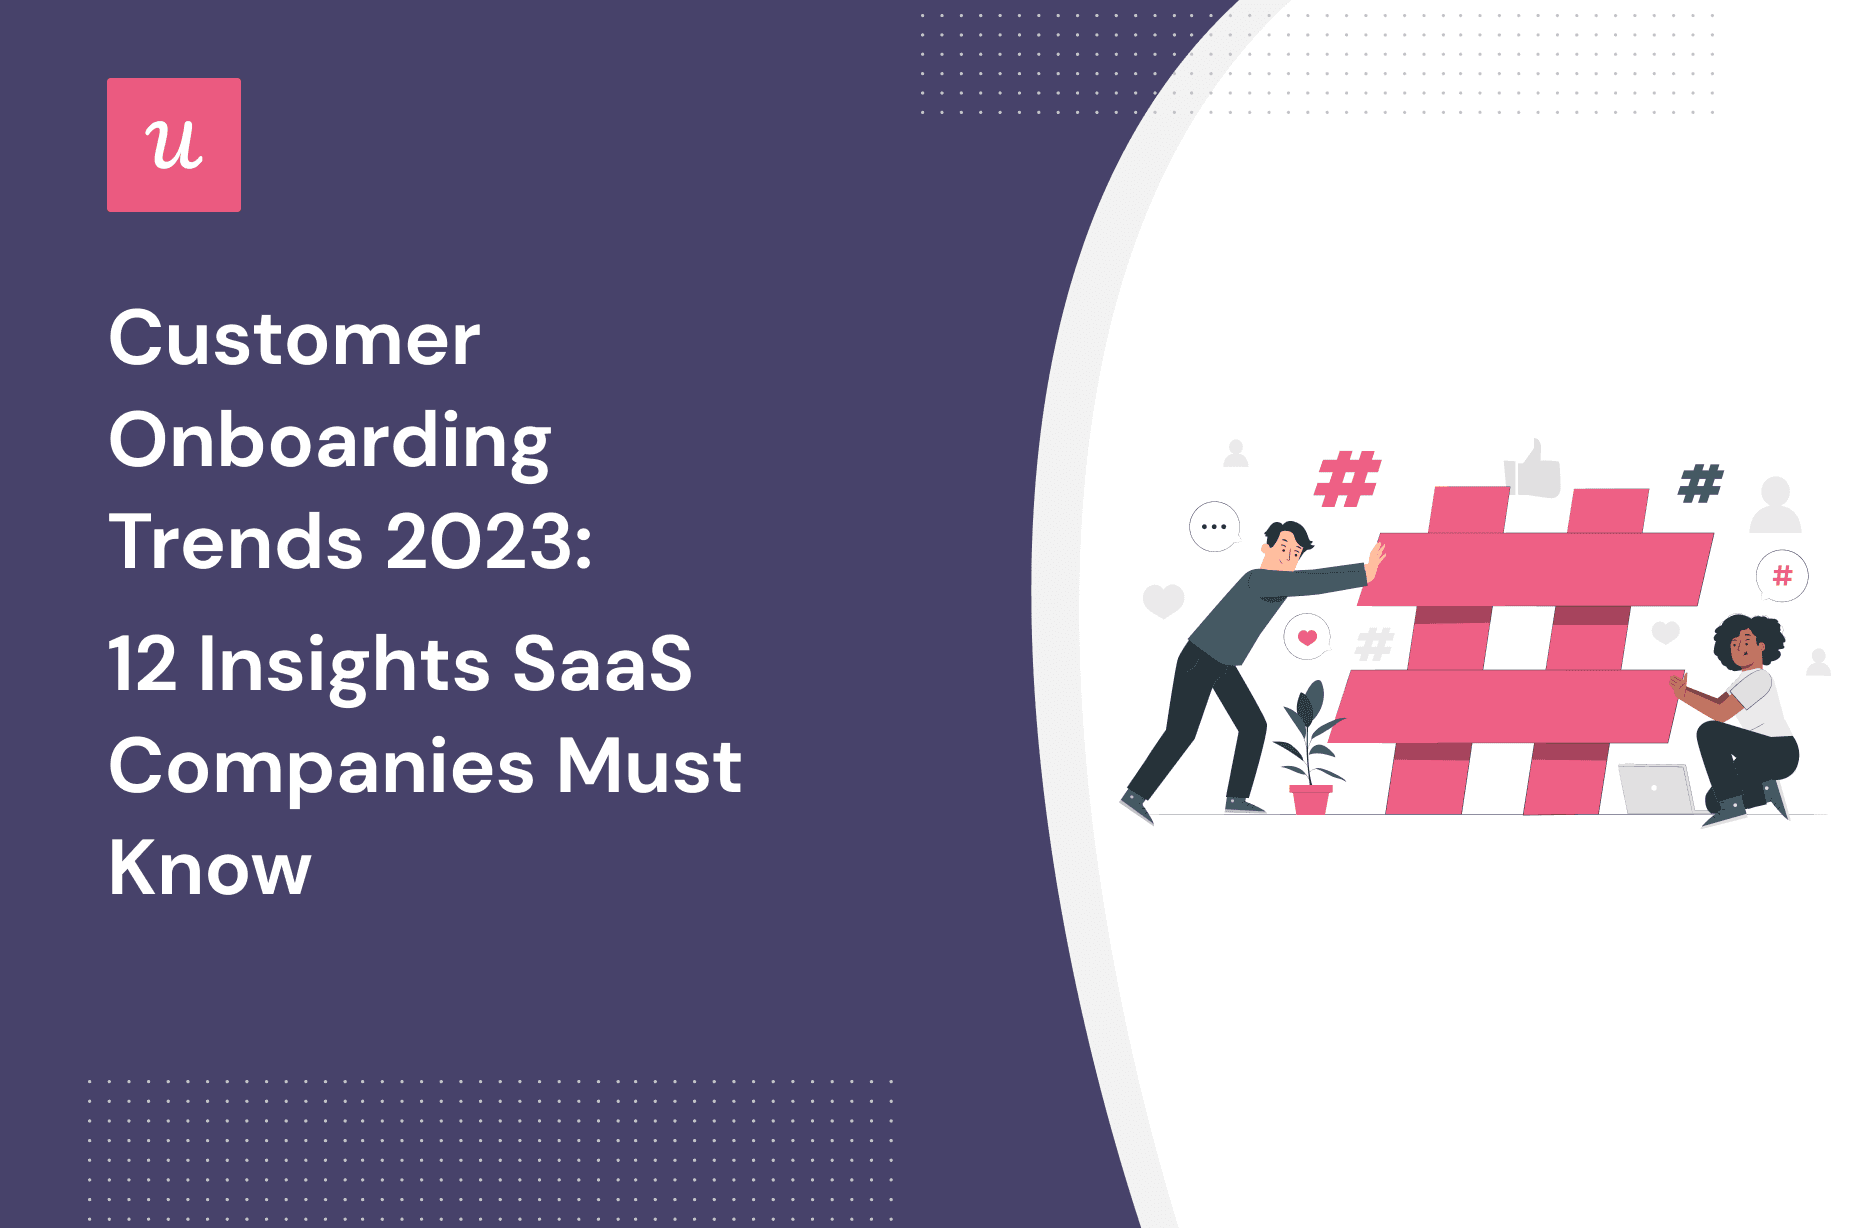 Customer Onboarding Trends 2023: 12 Insights SaaS Companies Must Know cover